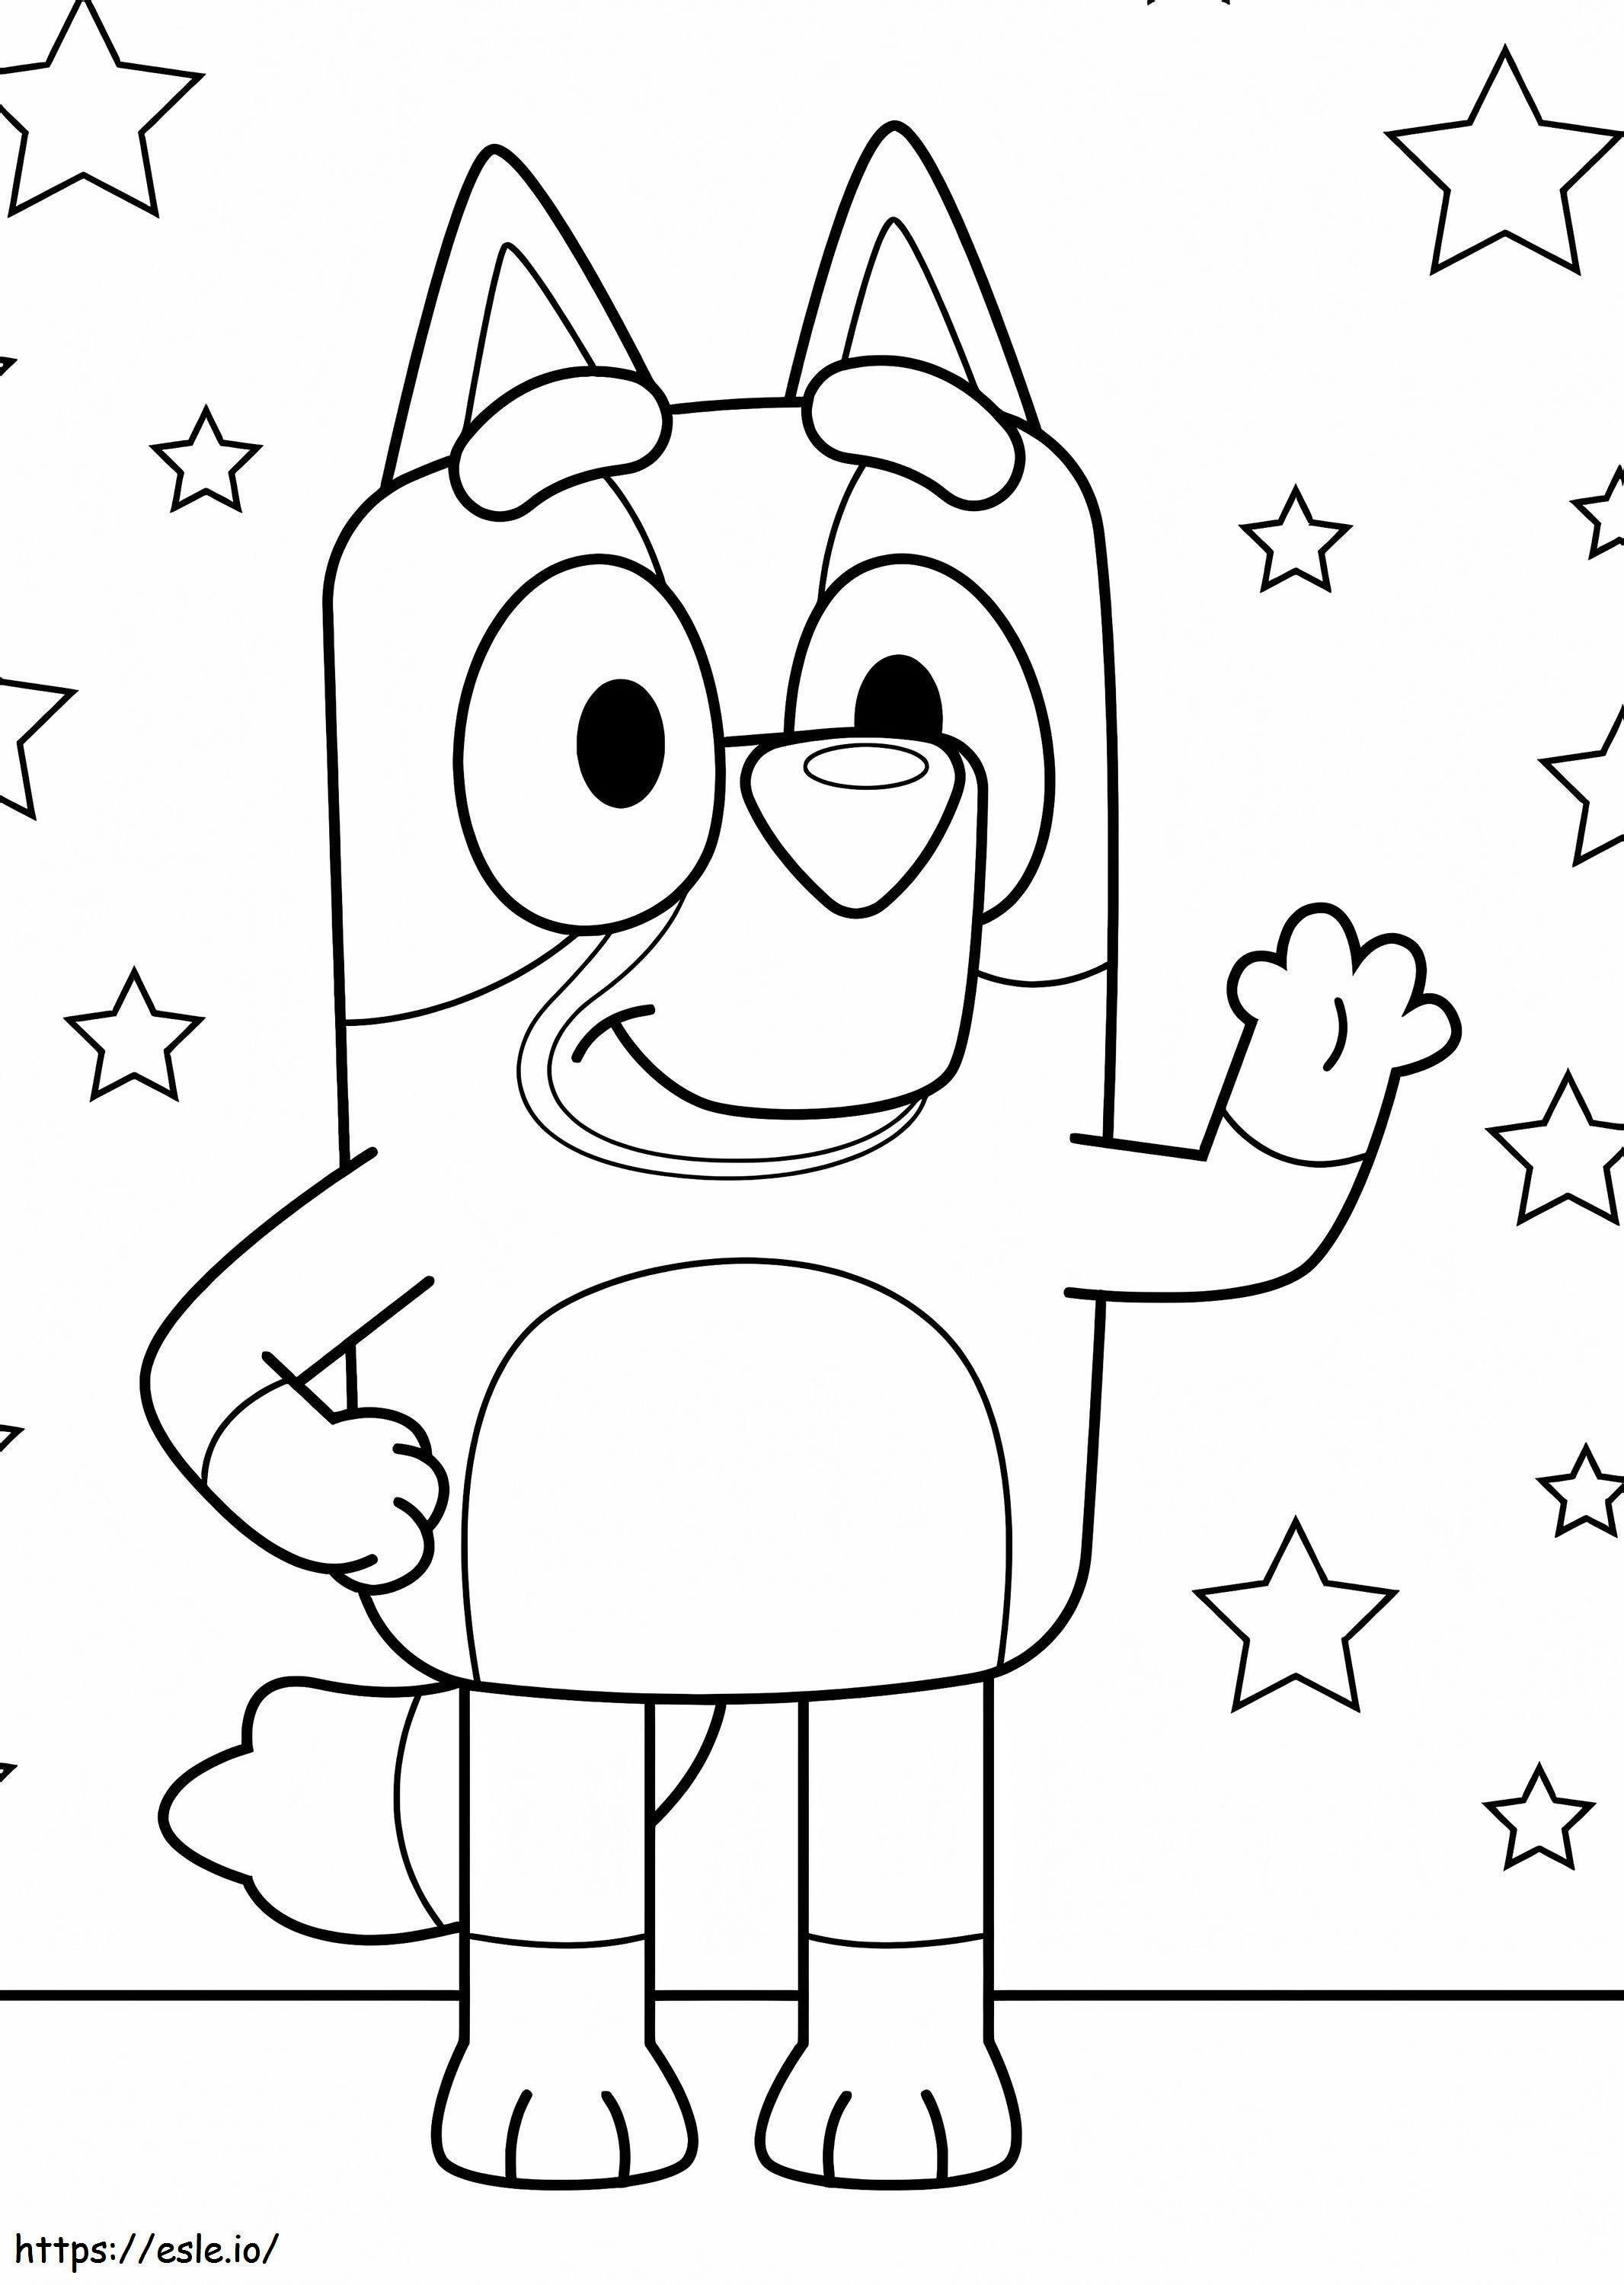 Friendly Bluey coloring page